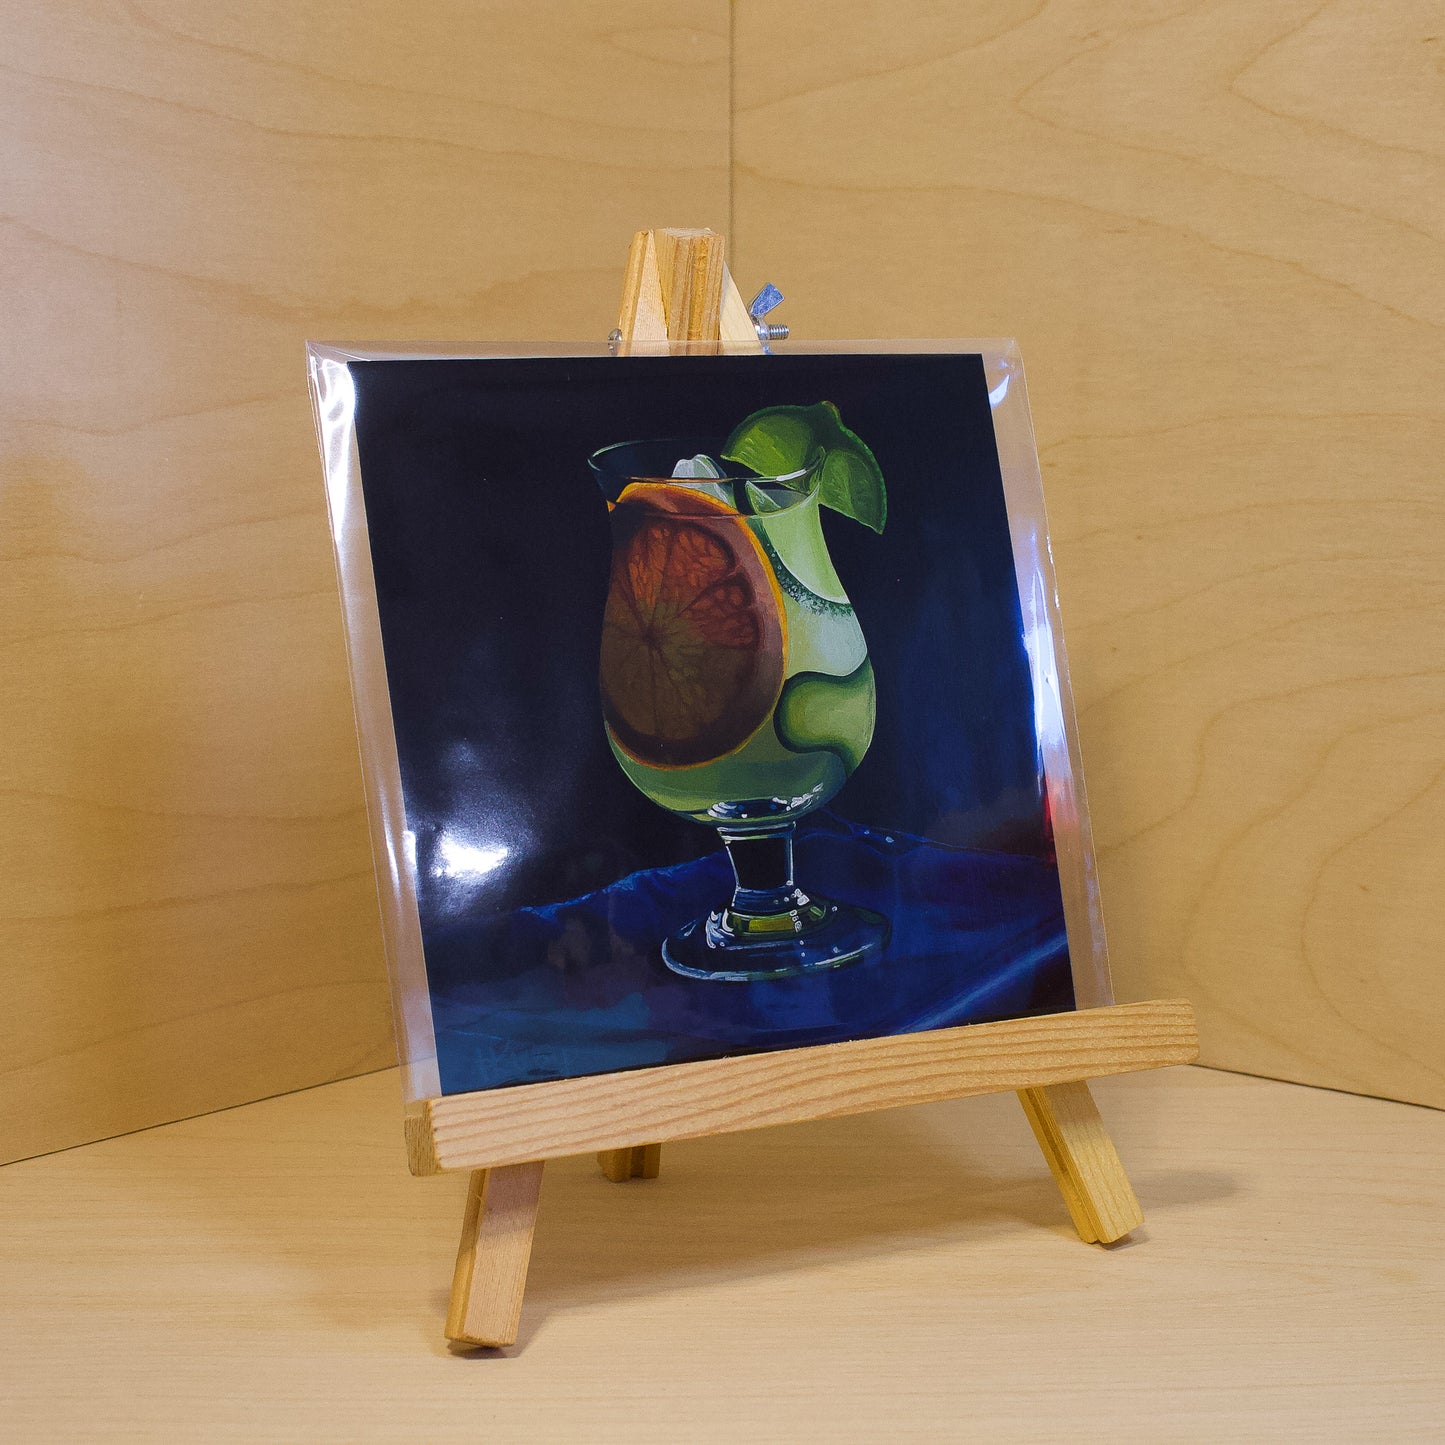 A 6x6" fine art print of the original acrylic painting "Gin & Tonic" by Hannah Kilby from Hannah Michelle Studios. Displayed in a protective plastic sleeve on a small, wooden easel.